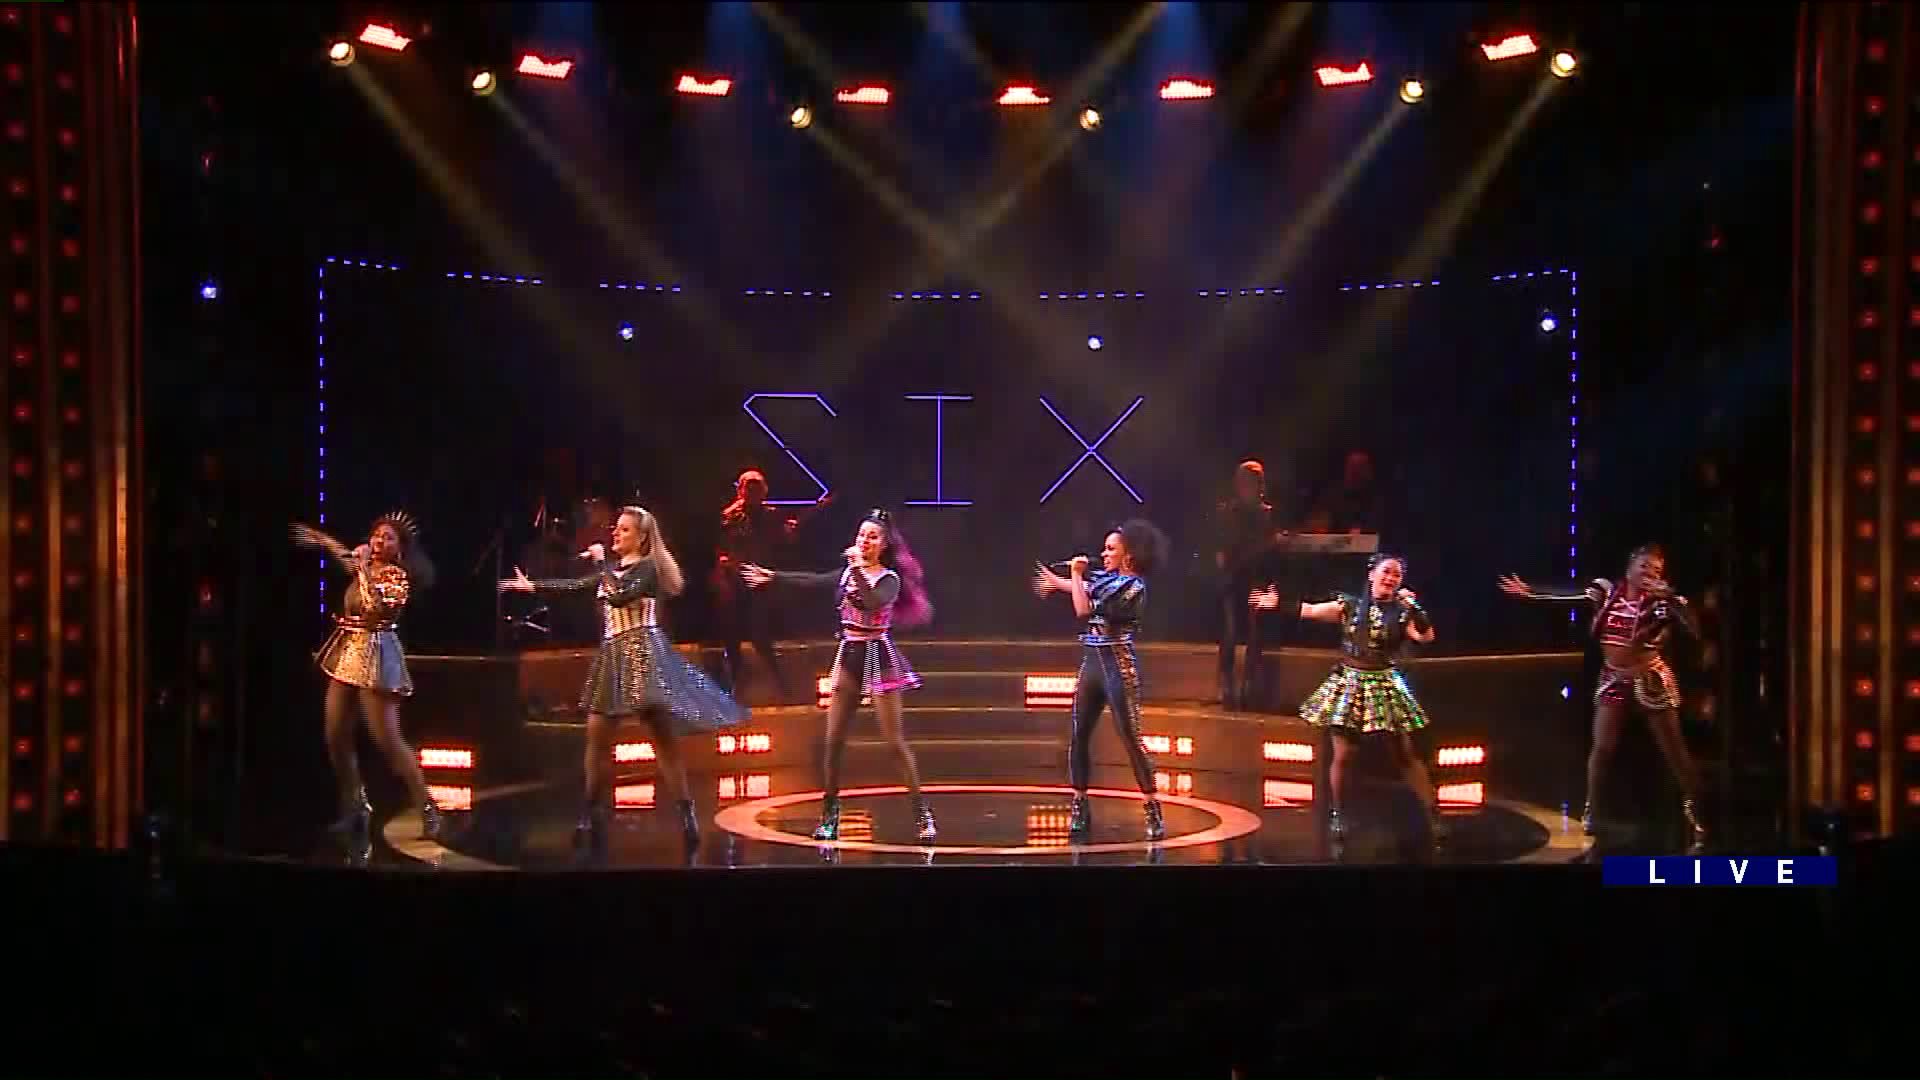 Around Town checks out ‘SIX’ at Chicago Shakespeare Theater